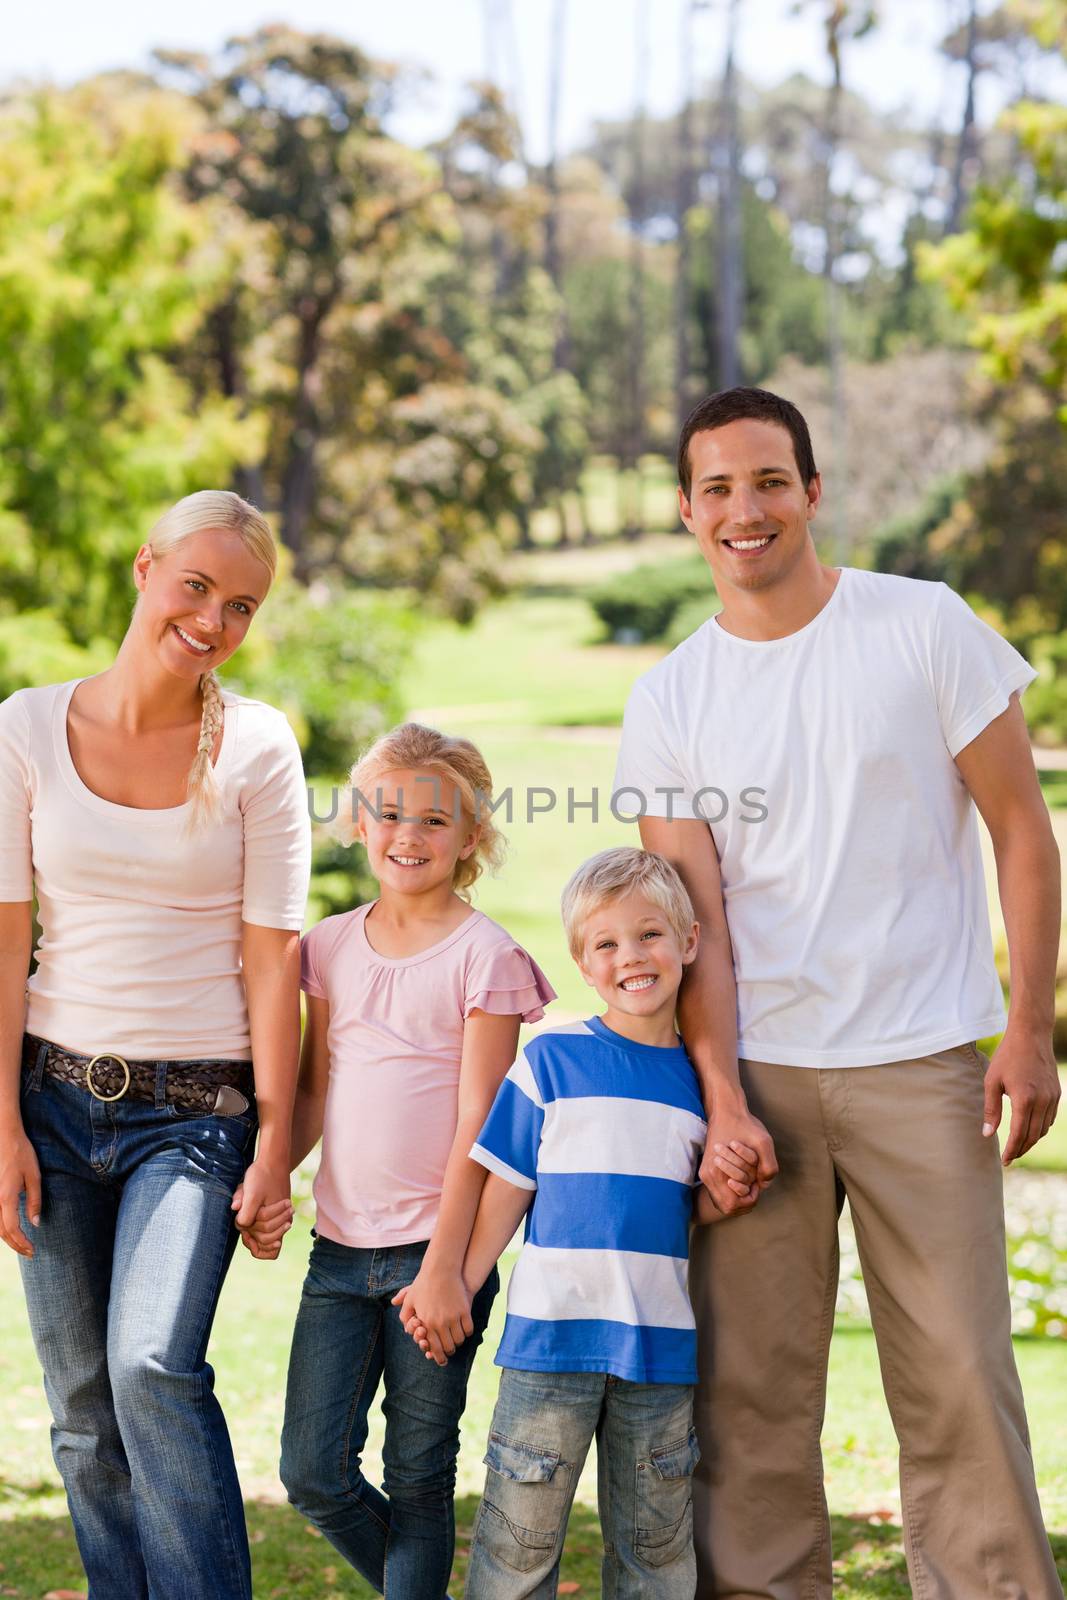 Adorable family in the park during the summer 